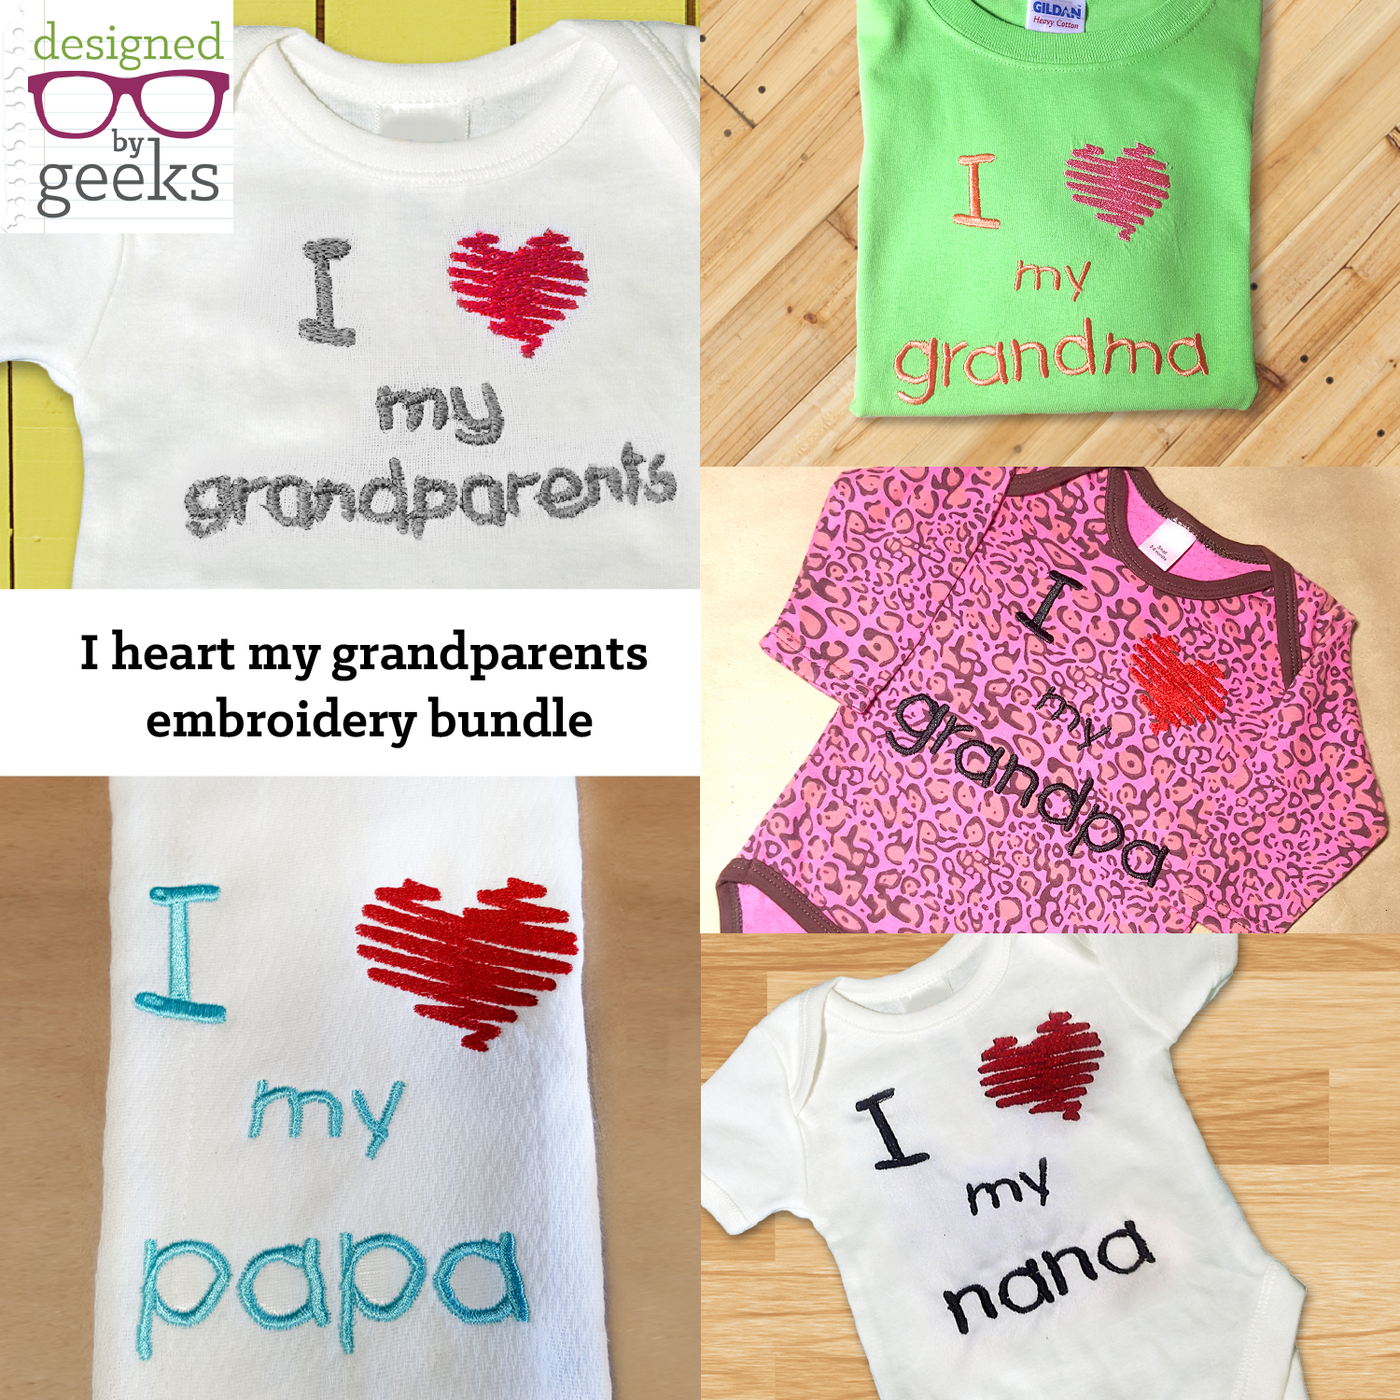 Grid of 5 designs in the Designed by Geeks "I heart my grandparents embroidery bundle." The embroidered designs say: I heart my grandparents, I heart my grandma, I heart my grandpa, I heart my papa, and I heart my nana.